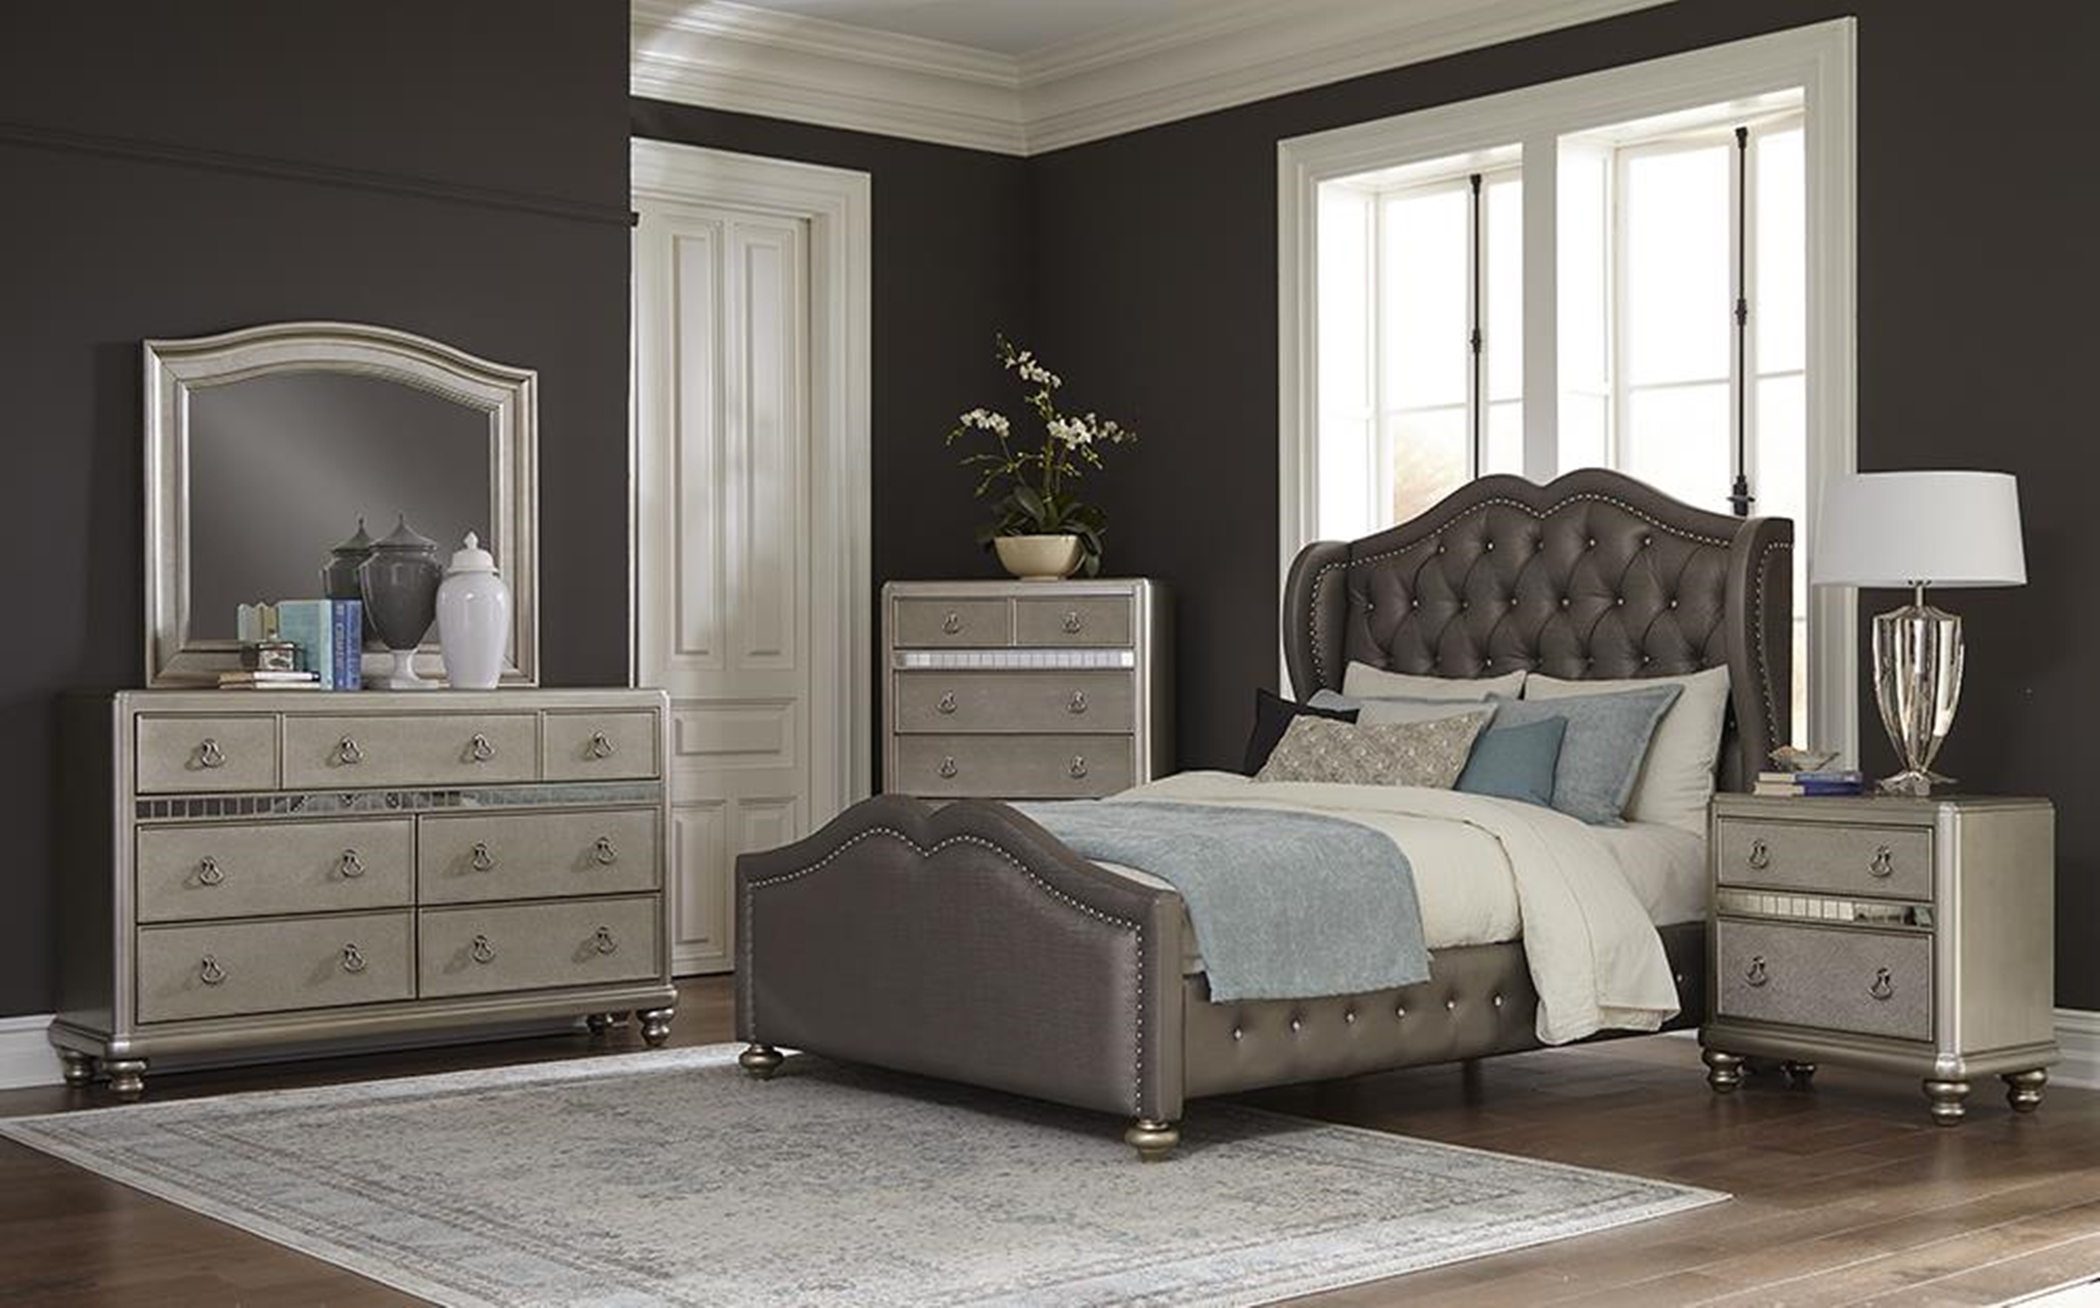 Belmont 4pc Queen Bed Set - Click Image to Close